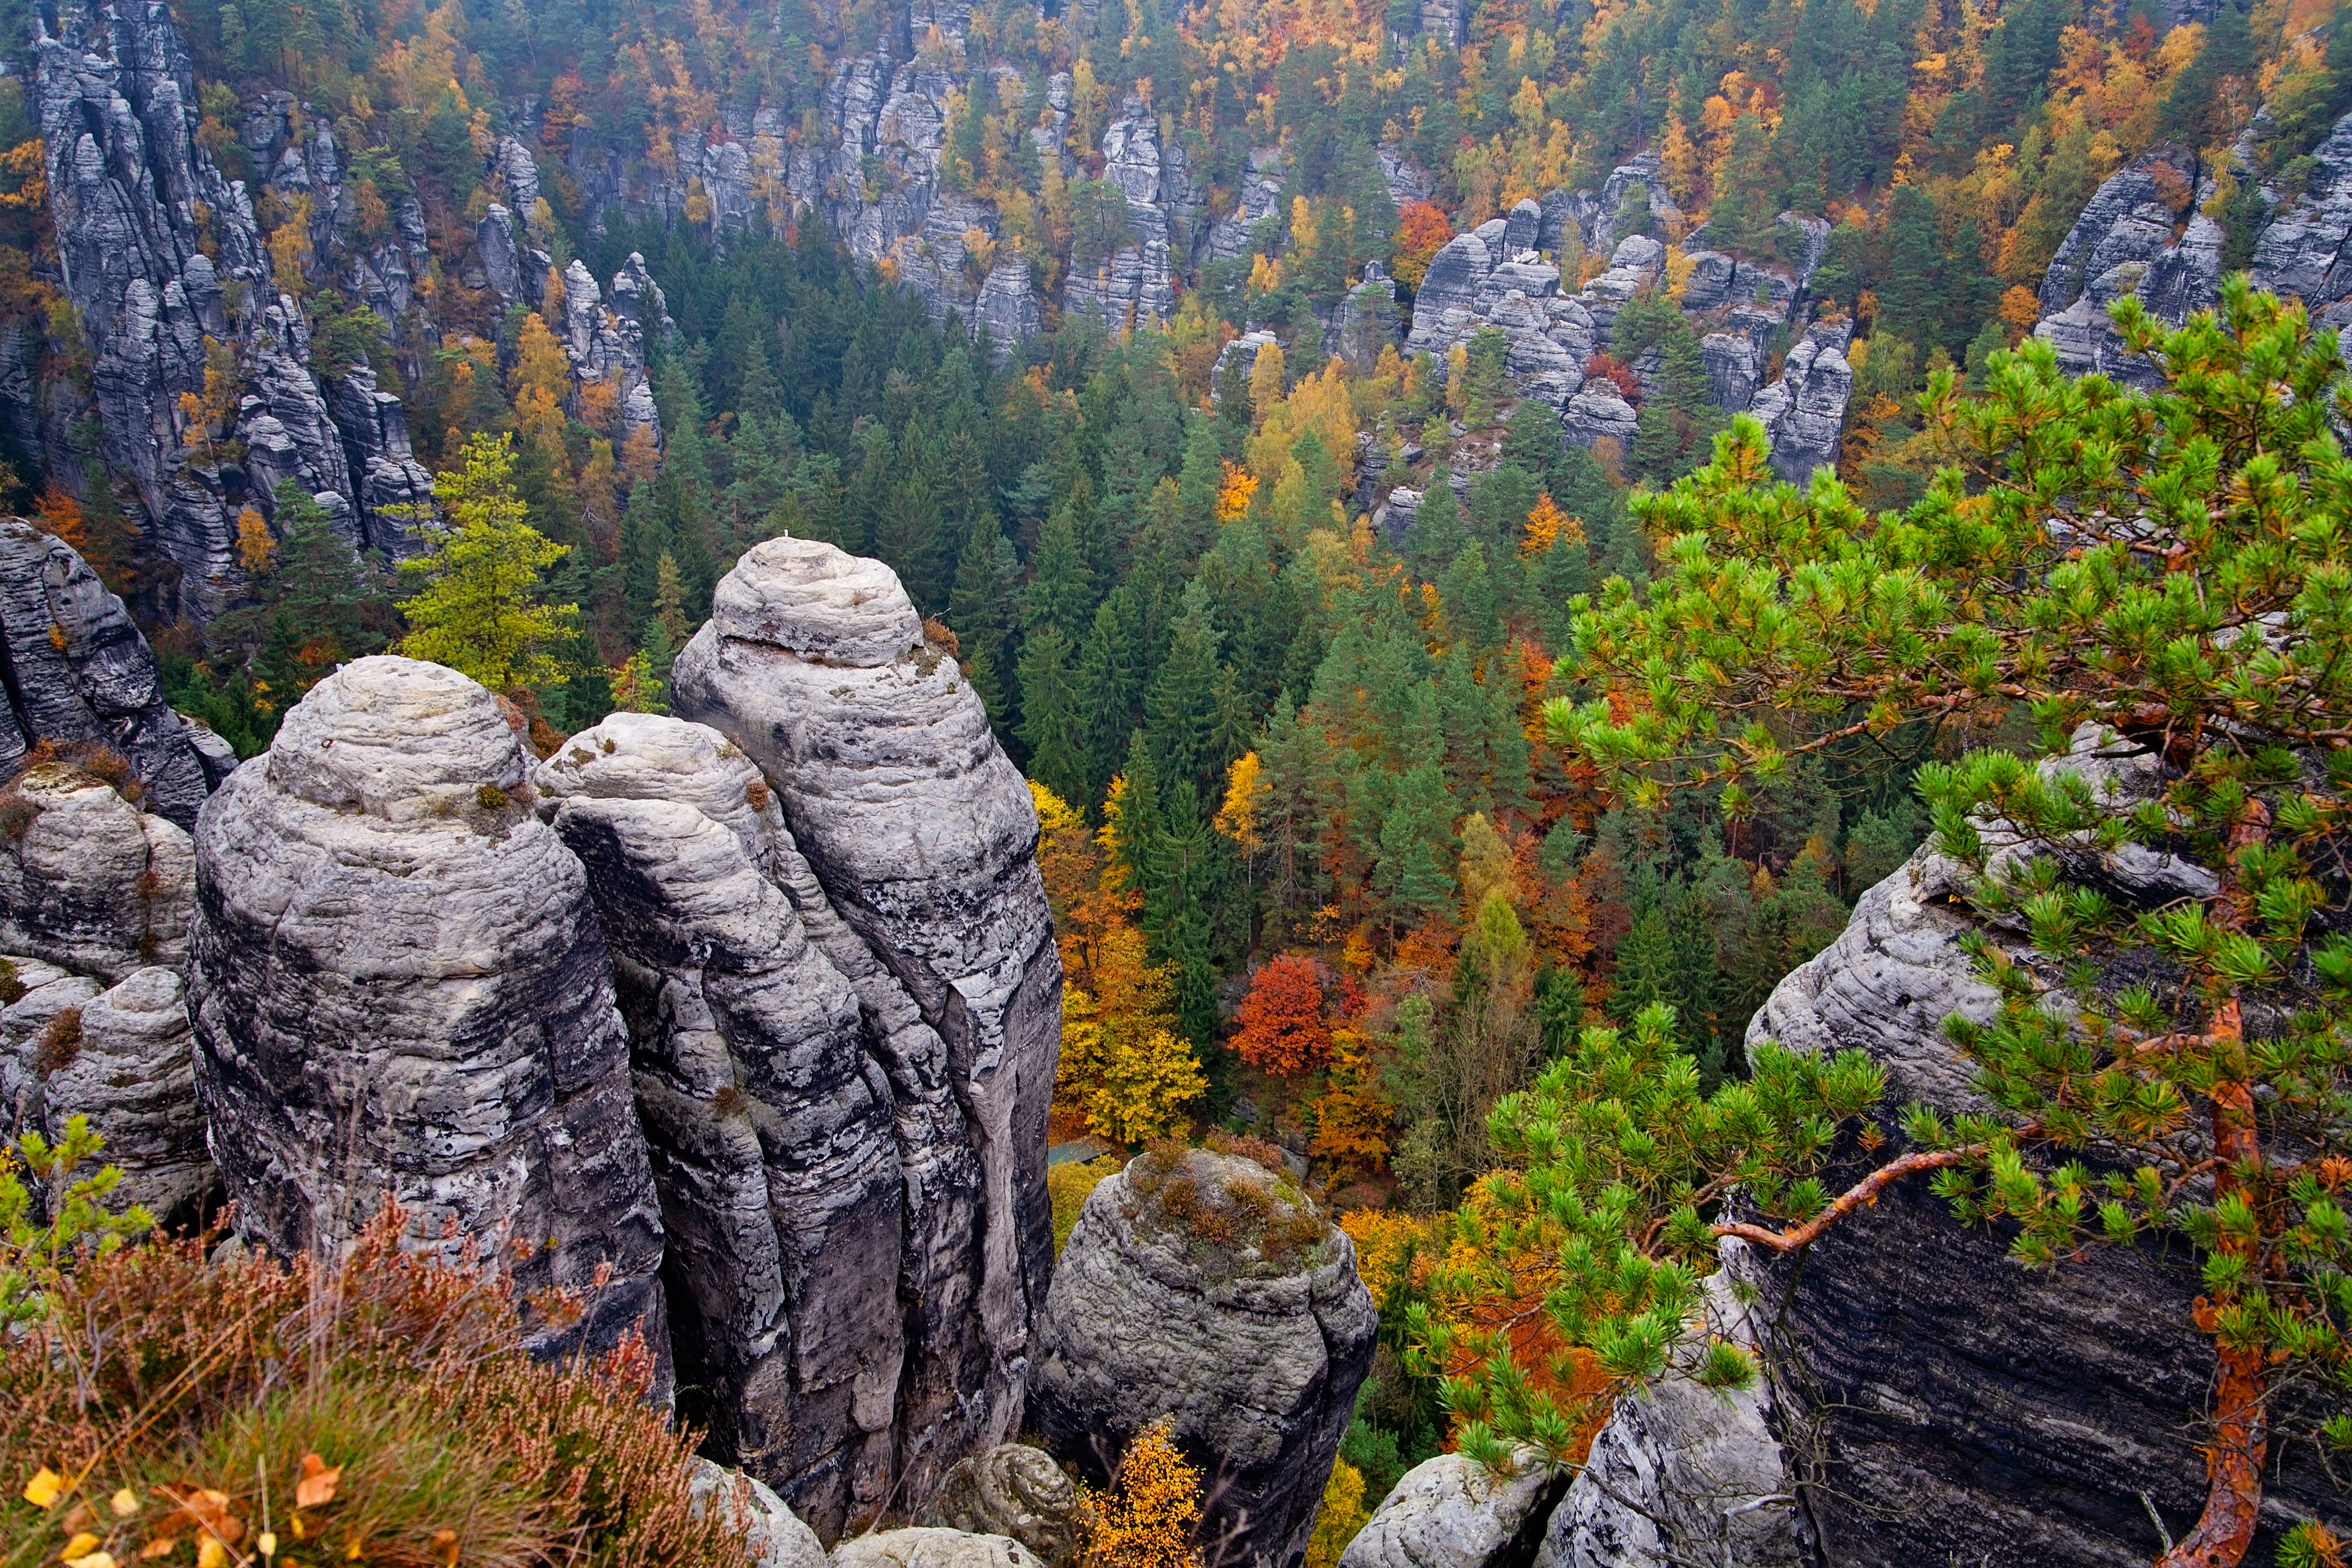 Earth Mountain Forest Sandstone Elbe Sandstone Mountains Fall Foliage Saxony Germany 4200x2800